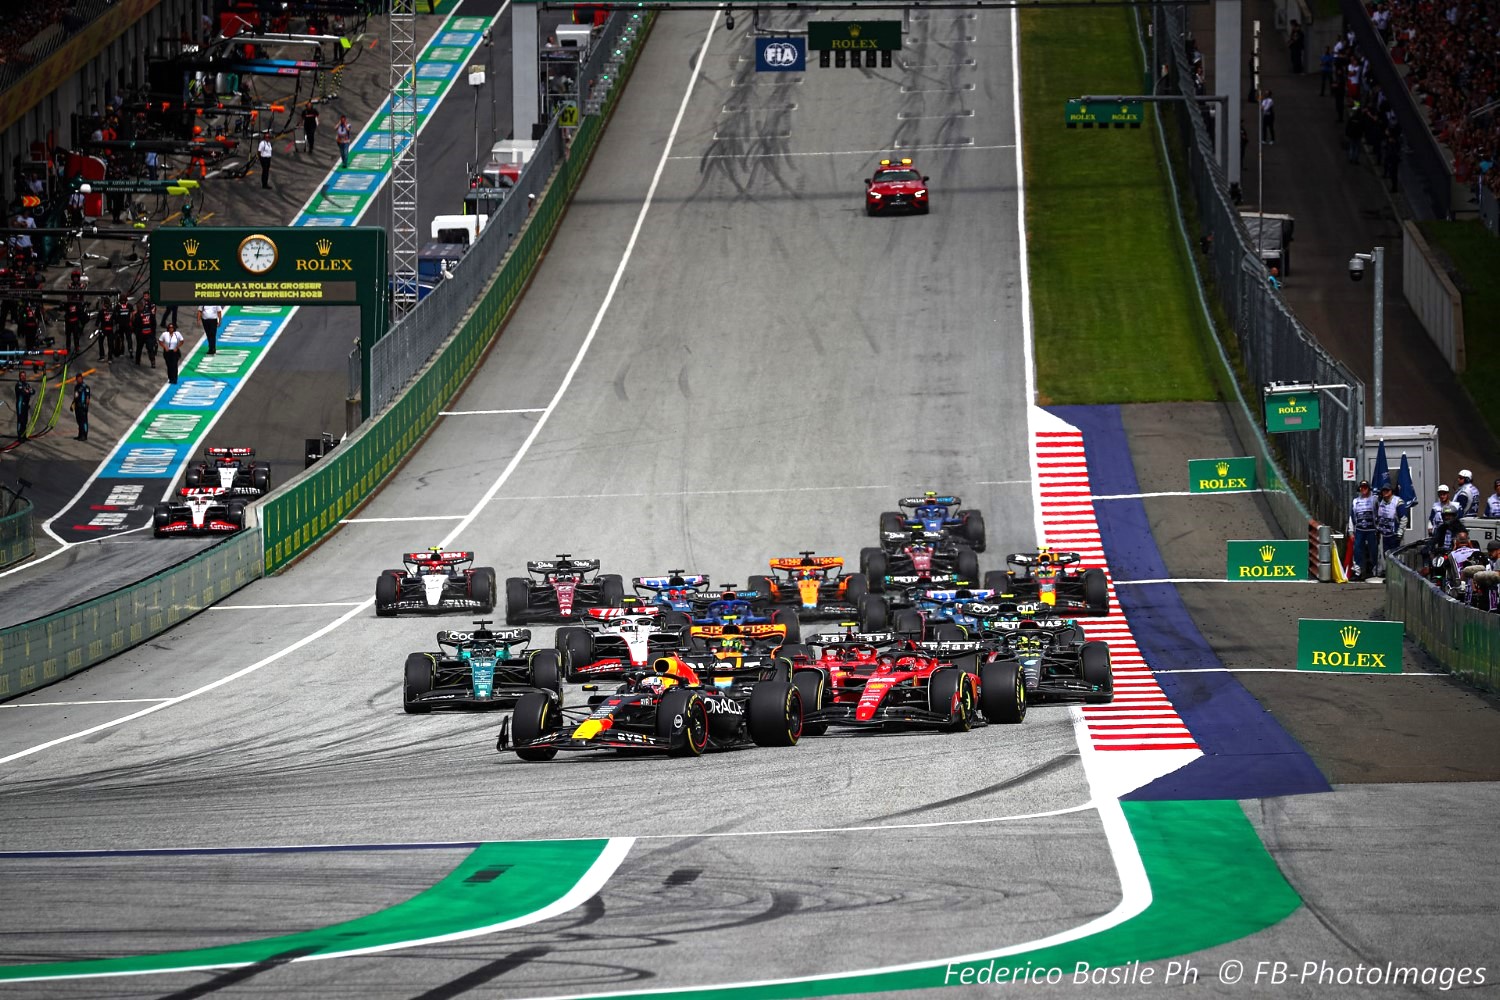 Start of the race during the Austrian GP, Spielberg 29 June-2 July 2023 at the RedBull Ring, Formula 1 World championship 2023.